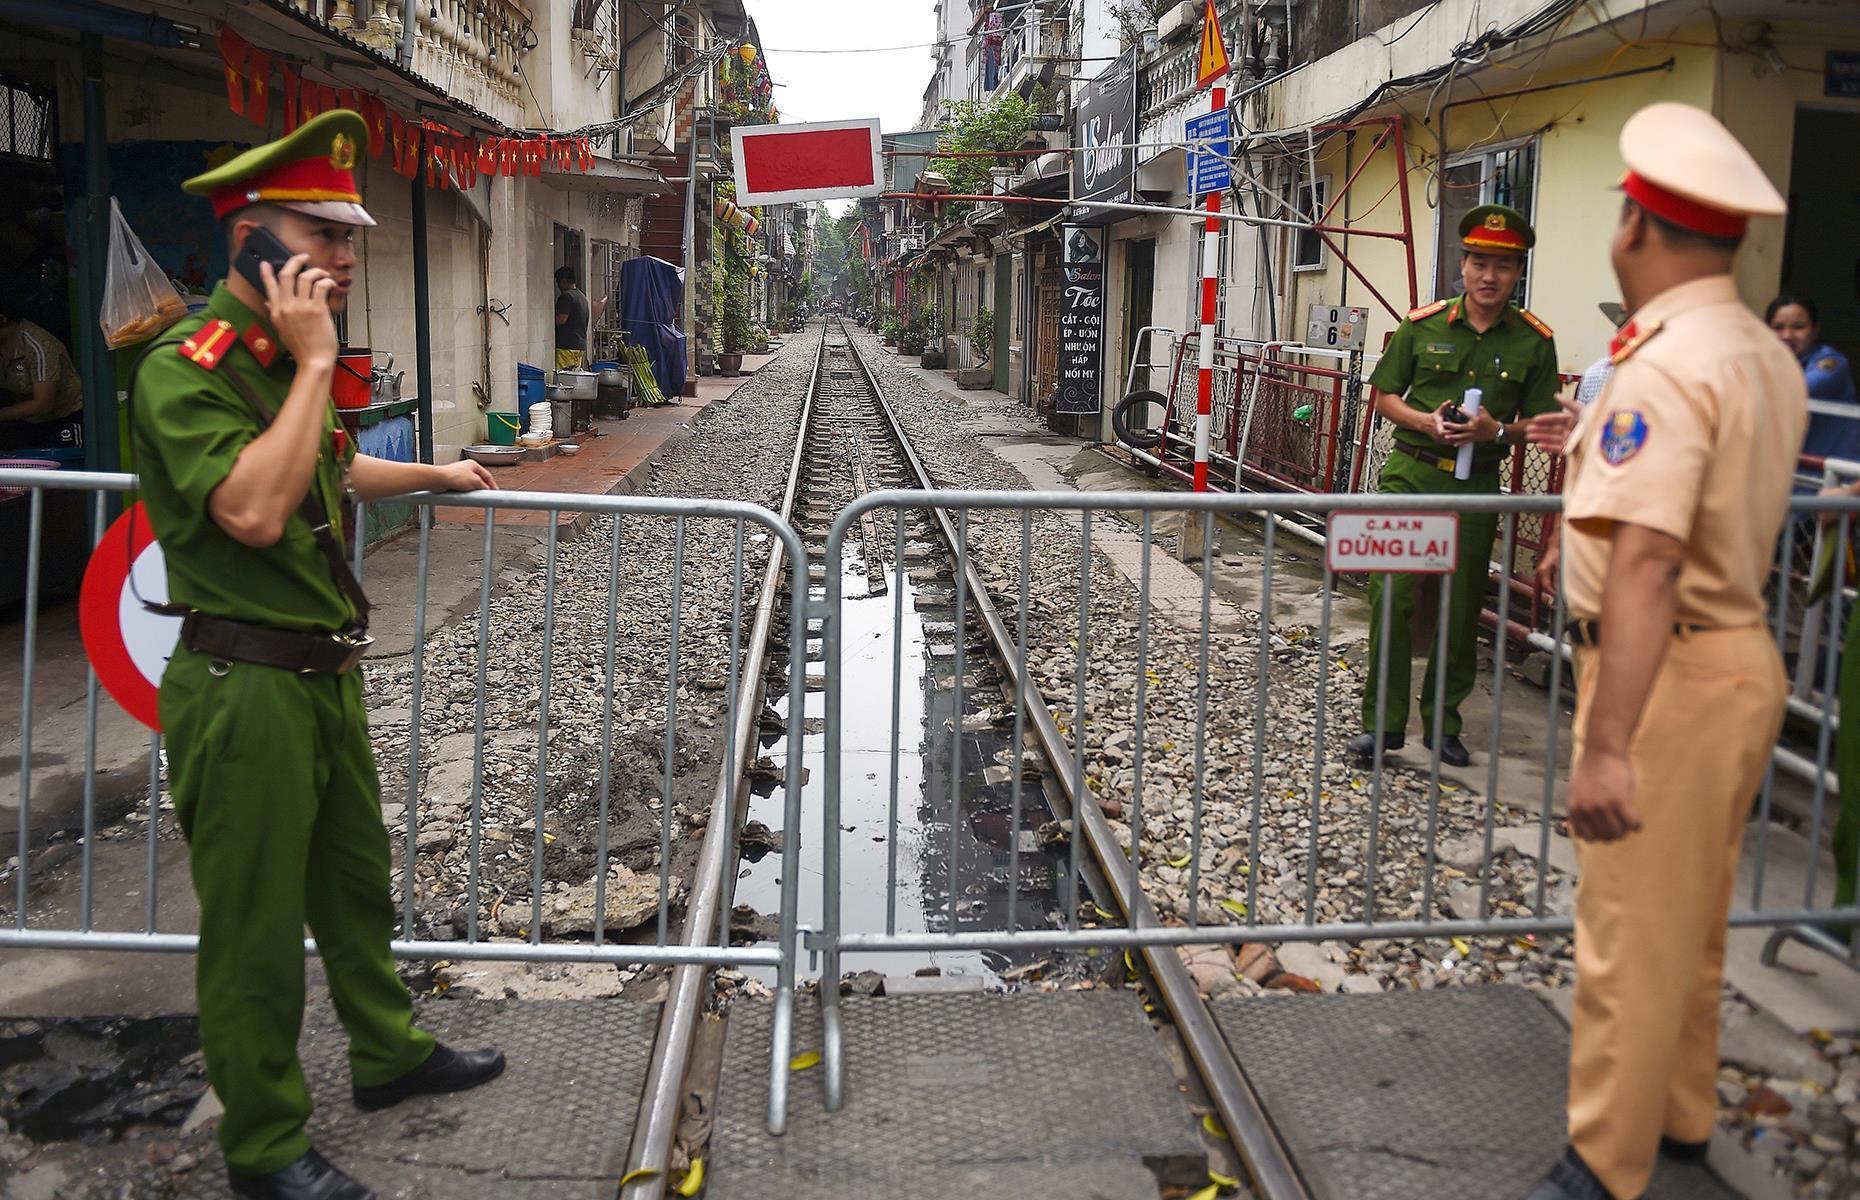 <p>Tourists would flock to the street to take photos of trains trundling through, but authorities have now shut the boulevard due to overcrowding and safety concerns. In September 2022, businesses on the street <a href="https://edition.cnn.com/travel/article/hanoi-train-street-cafes-shutdown-intl-hnk/index.html">were ordered to close</a> and barricades were put in place to prevent tourists from accessing it.</p>